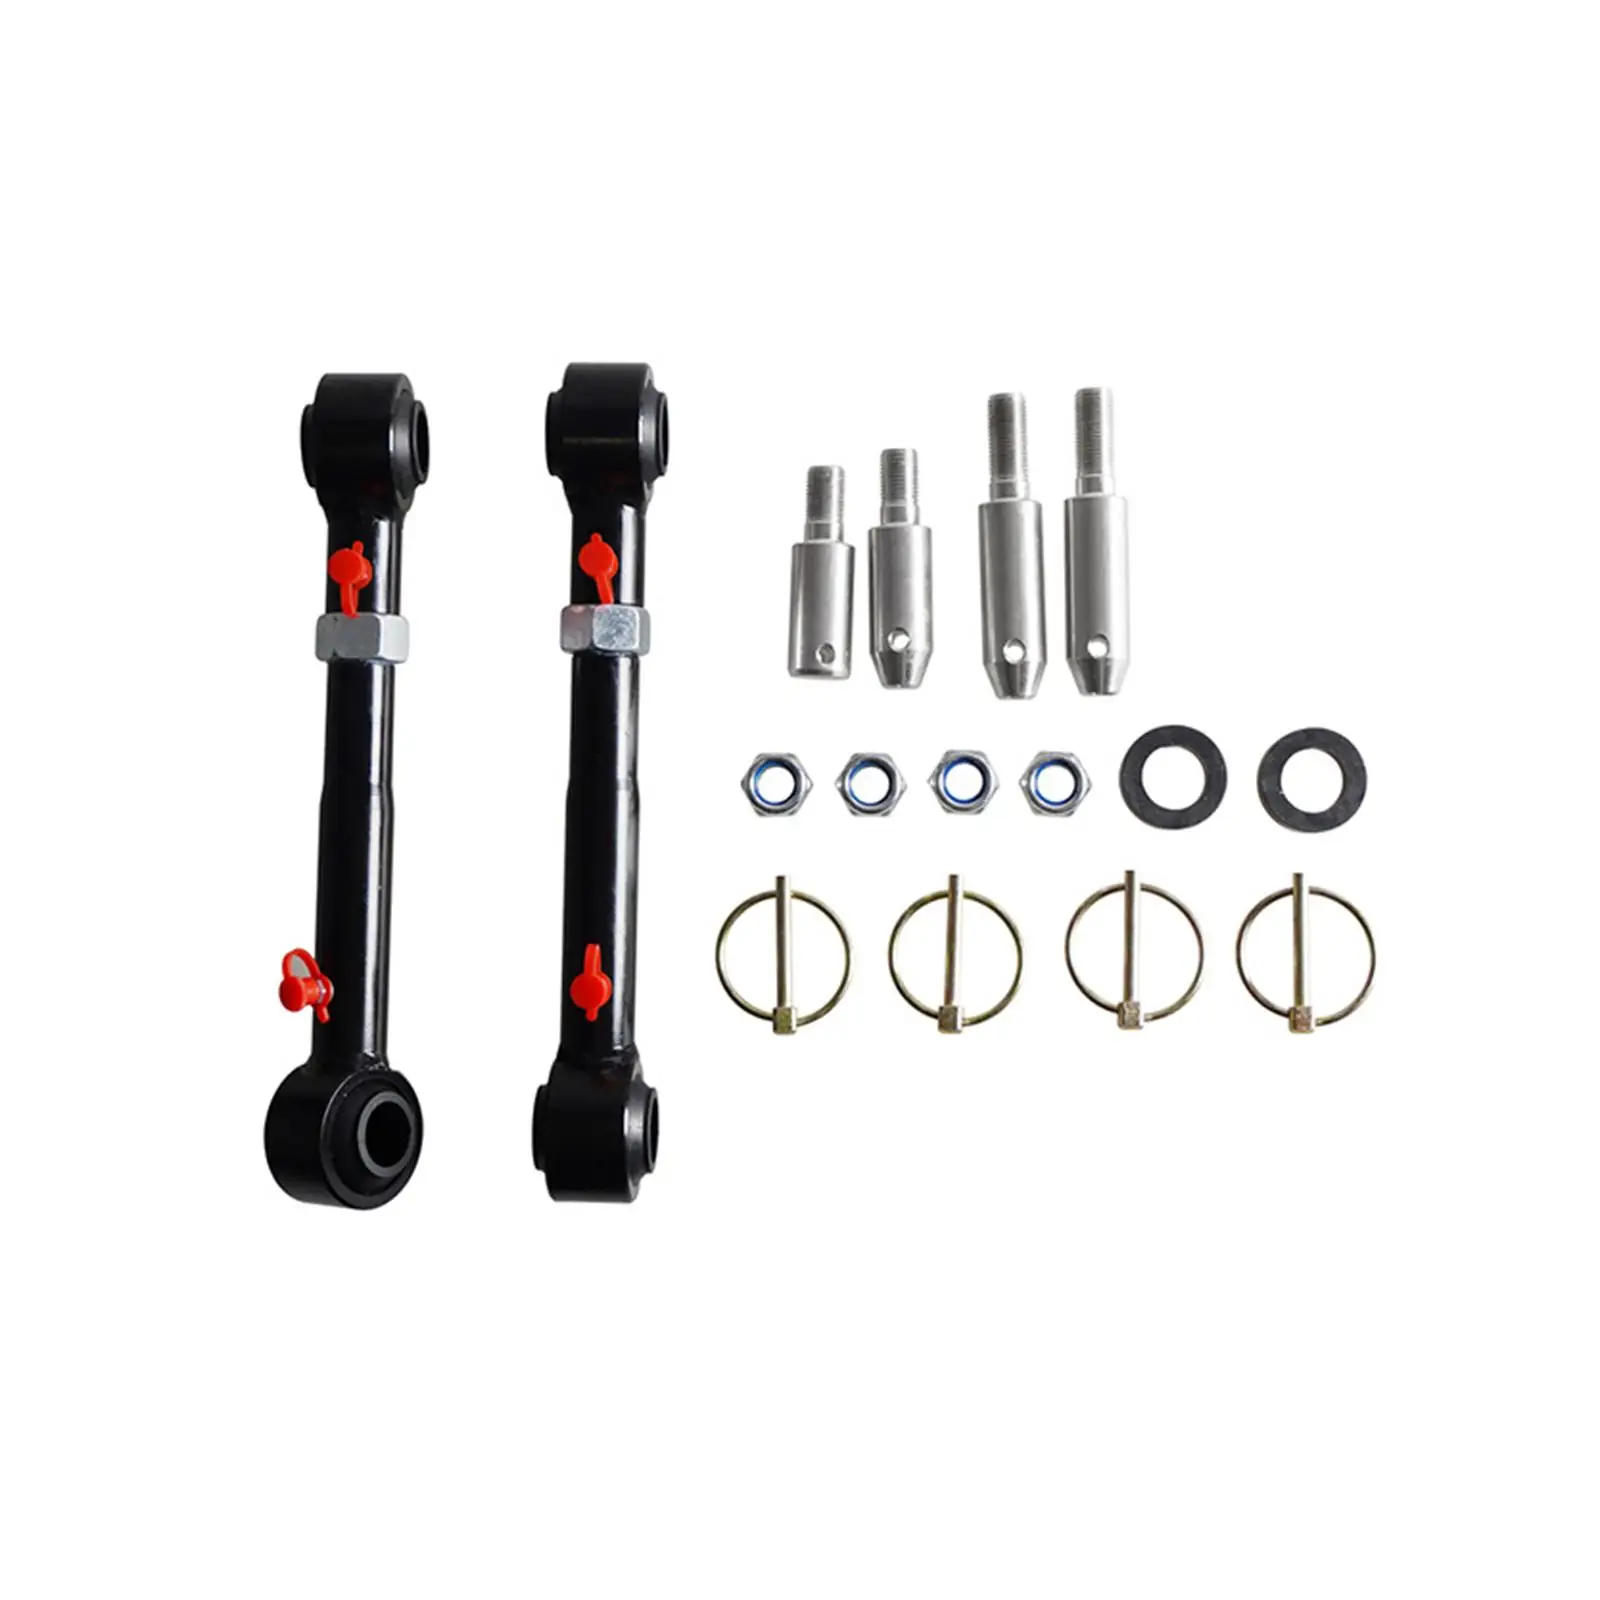 Front Swaybar Quicker Disconnect System Assembly for JK 2007-2018